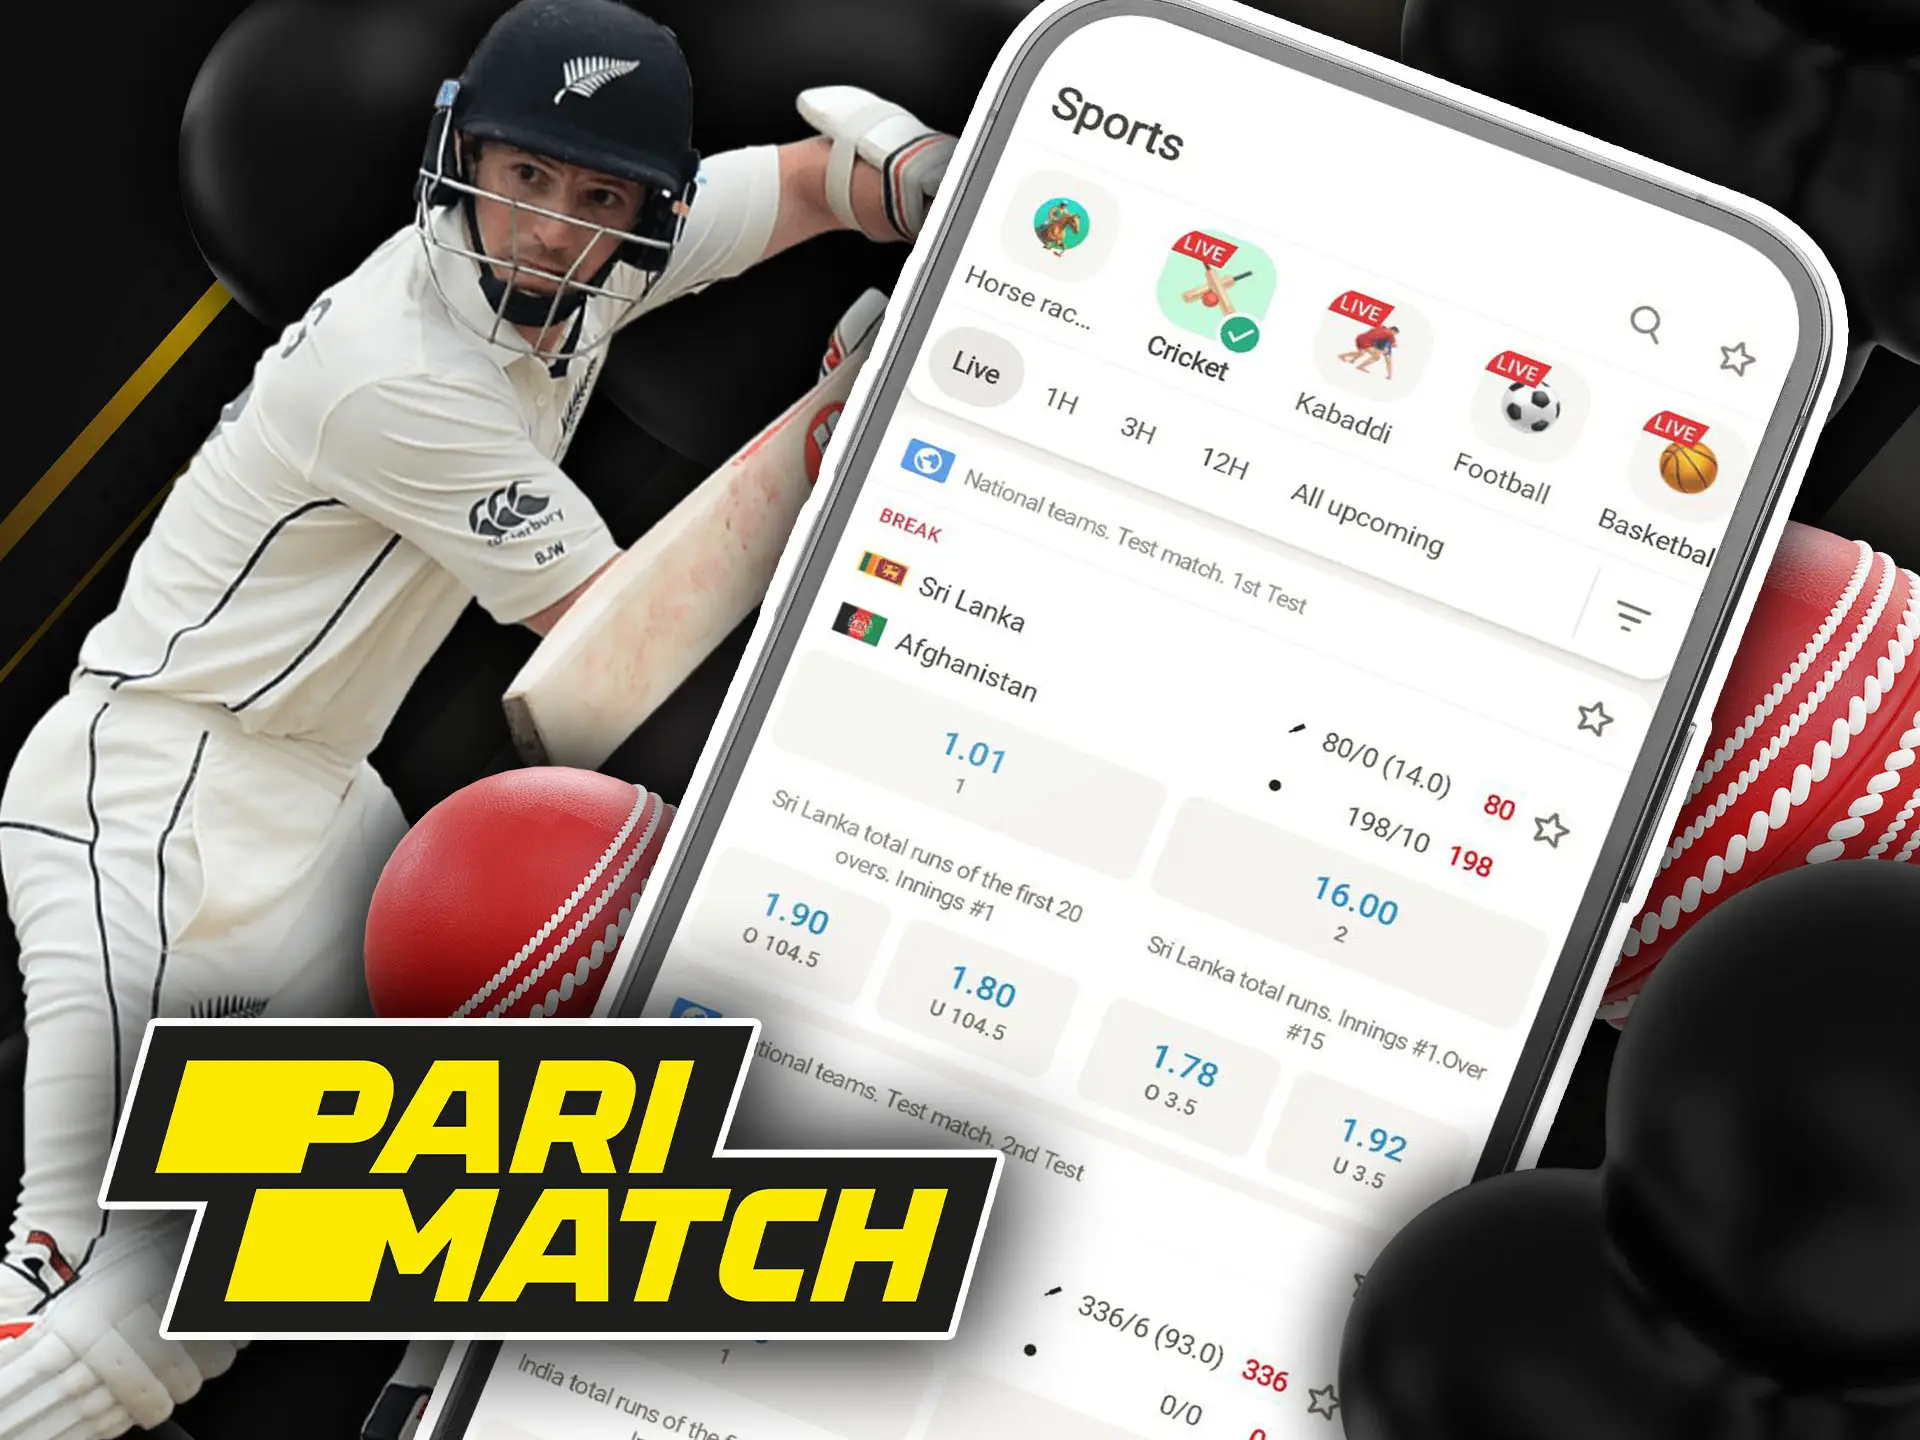 Cricket betting on Parimatch app for India.